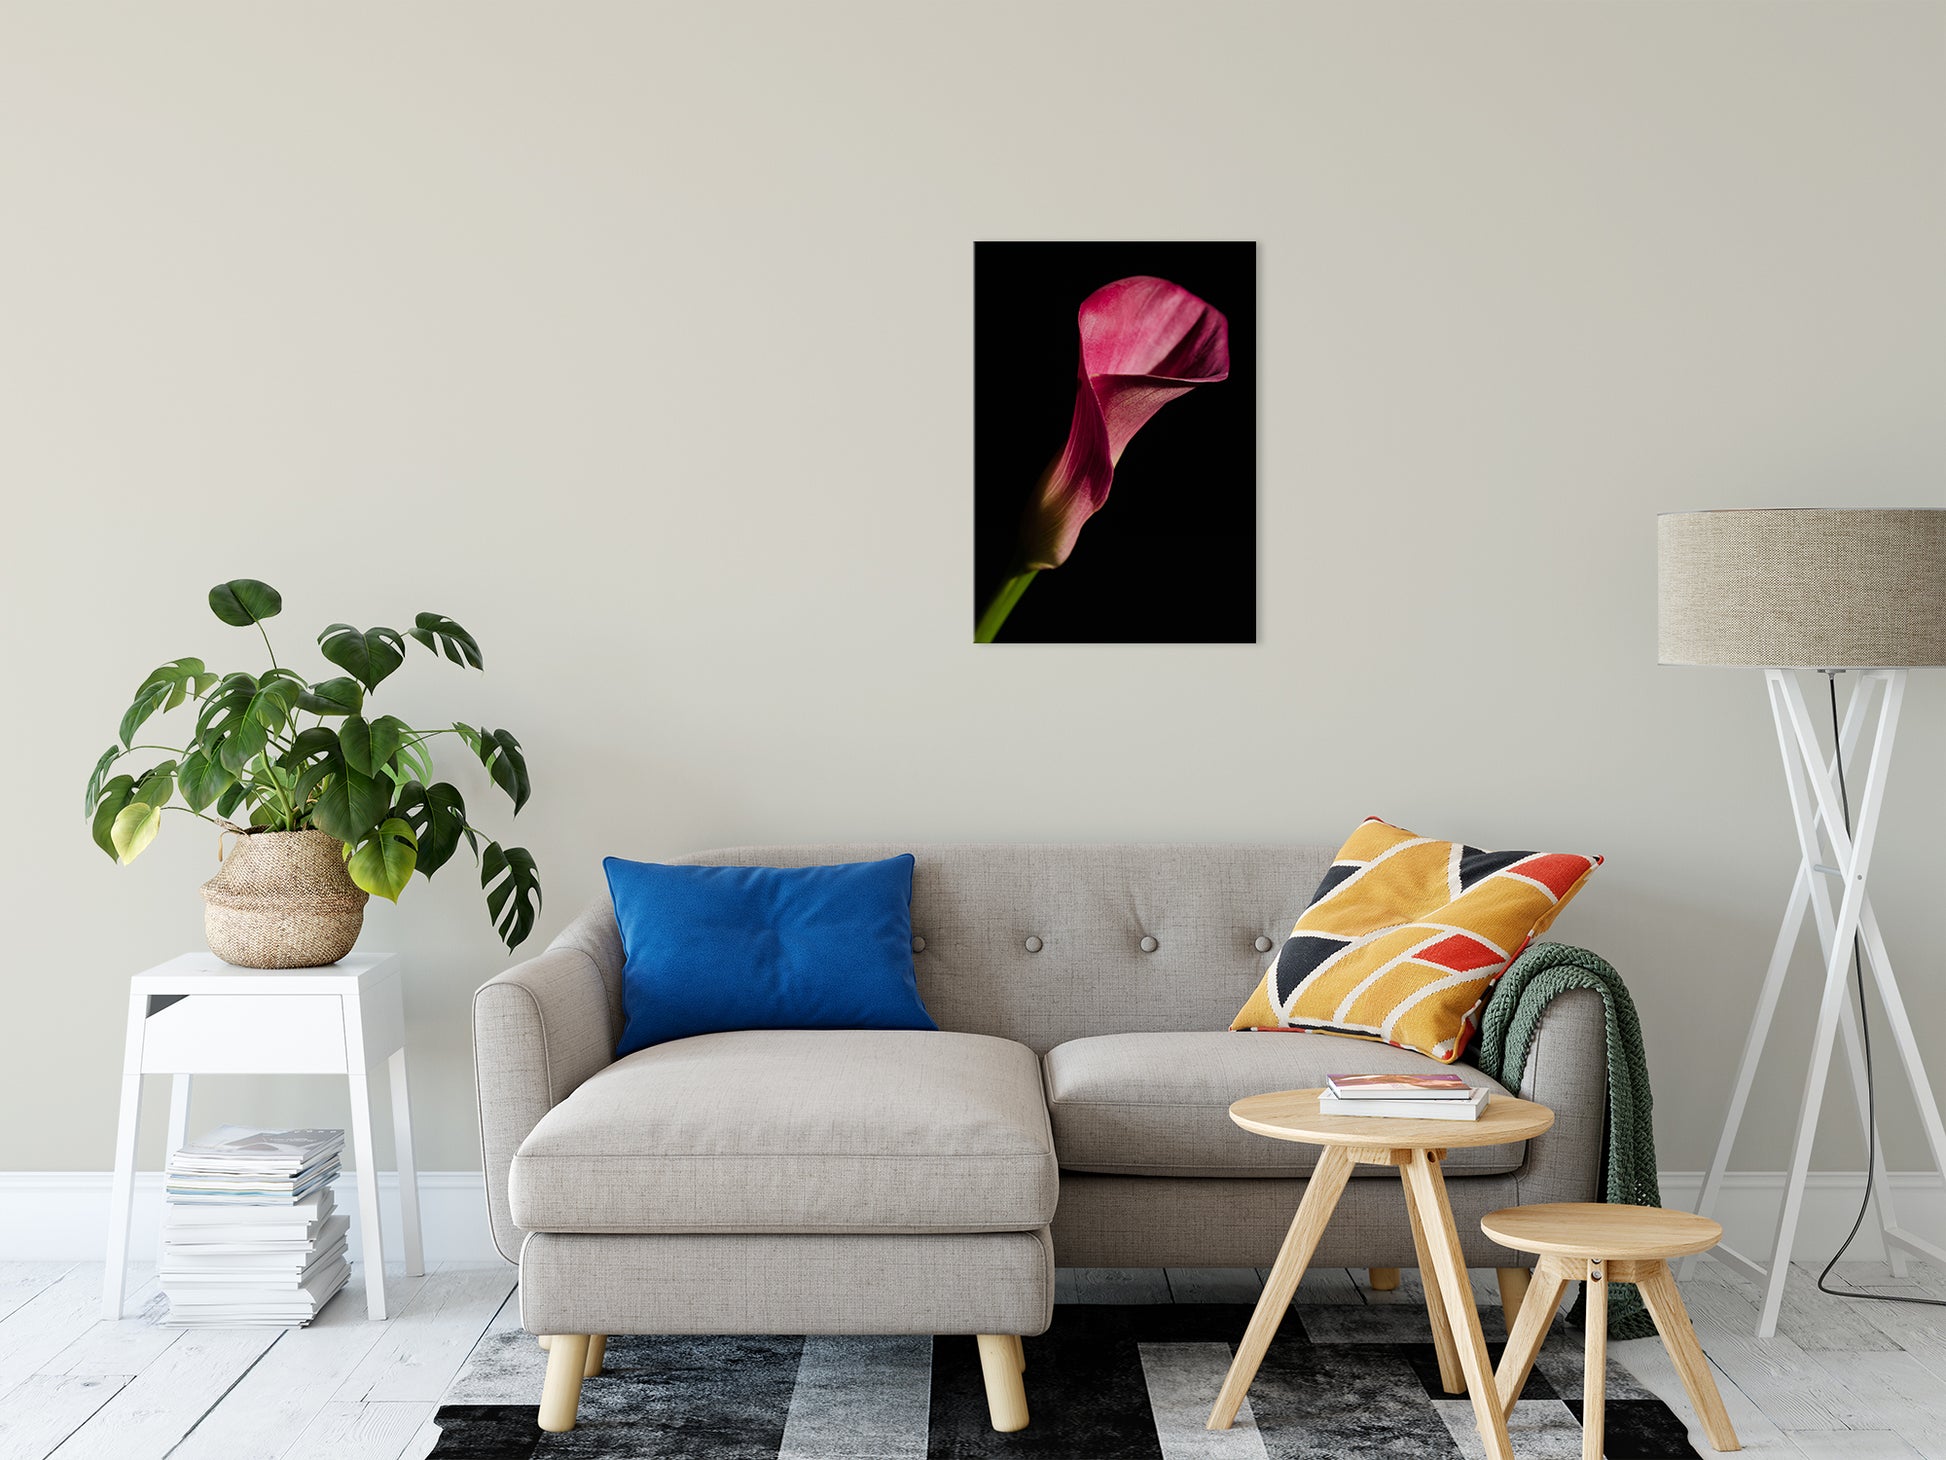 Pink Calla Lily Flower on Black Nature / Floral Photo Fine Art Canvas Wall Art Prints 20" x 30" - PIPAFINEART